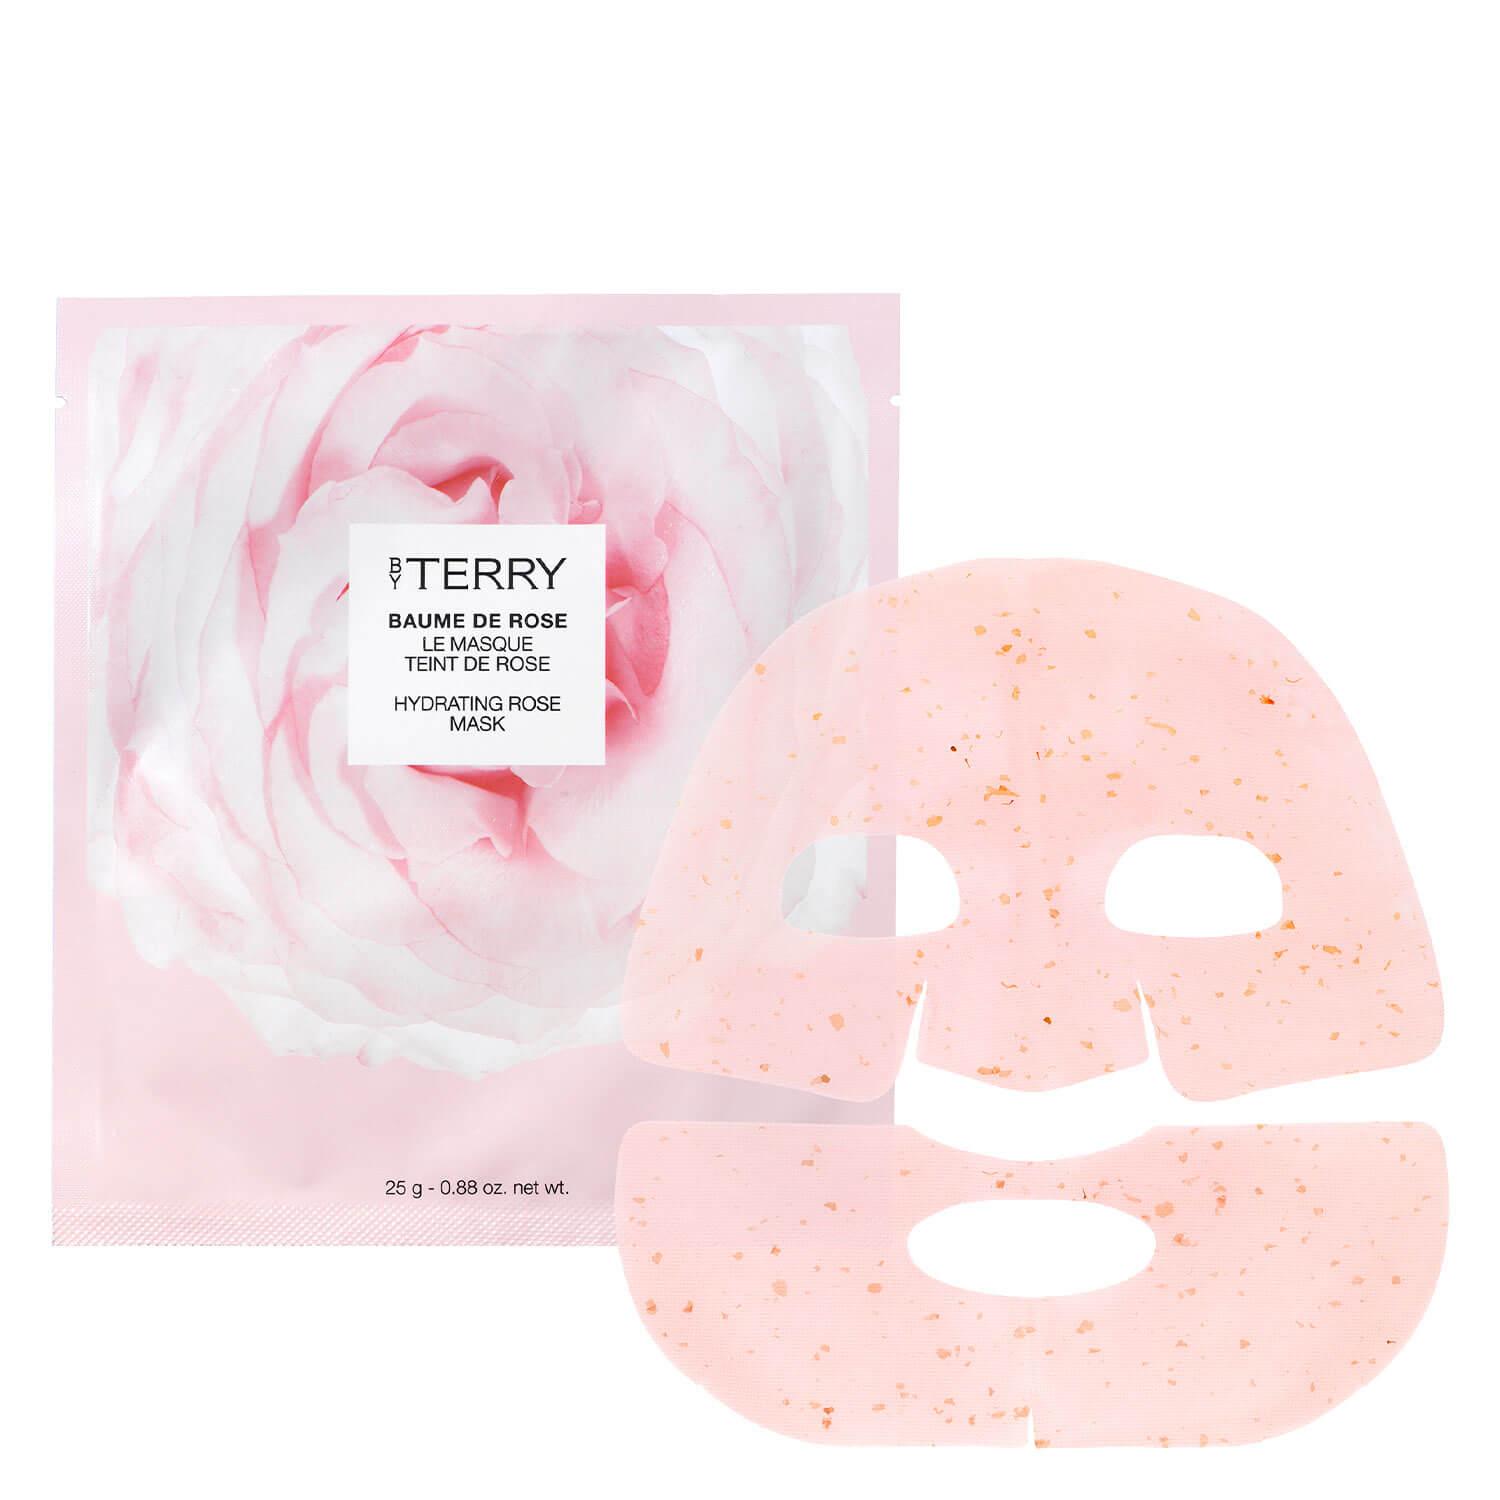 By Terry Care - Baume de Rose Hydrating Sheet Mask